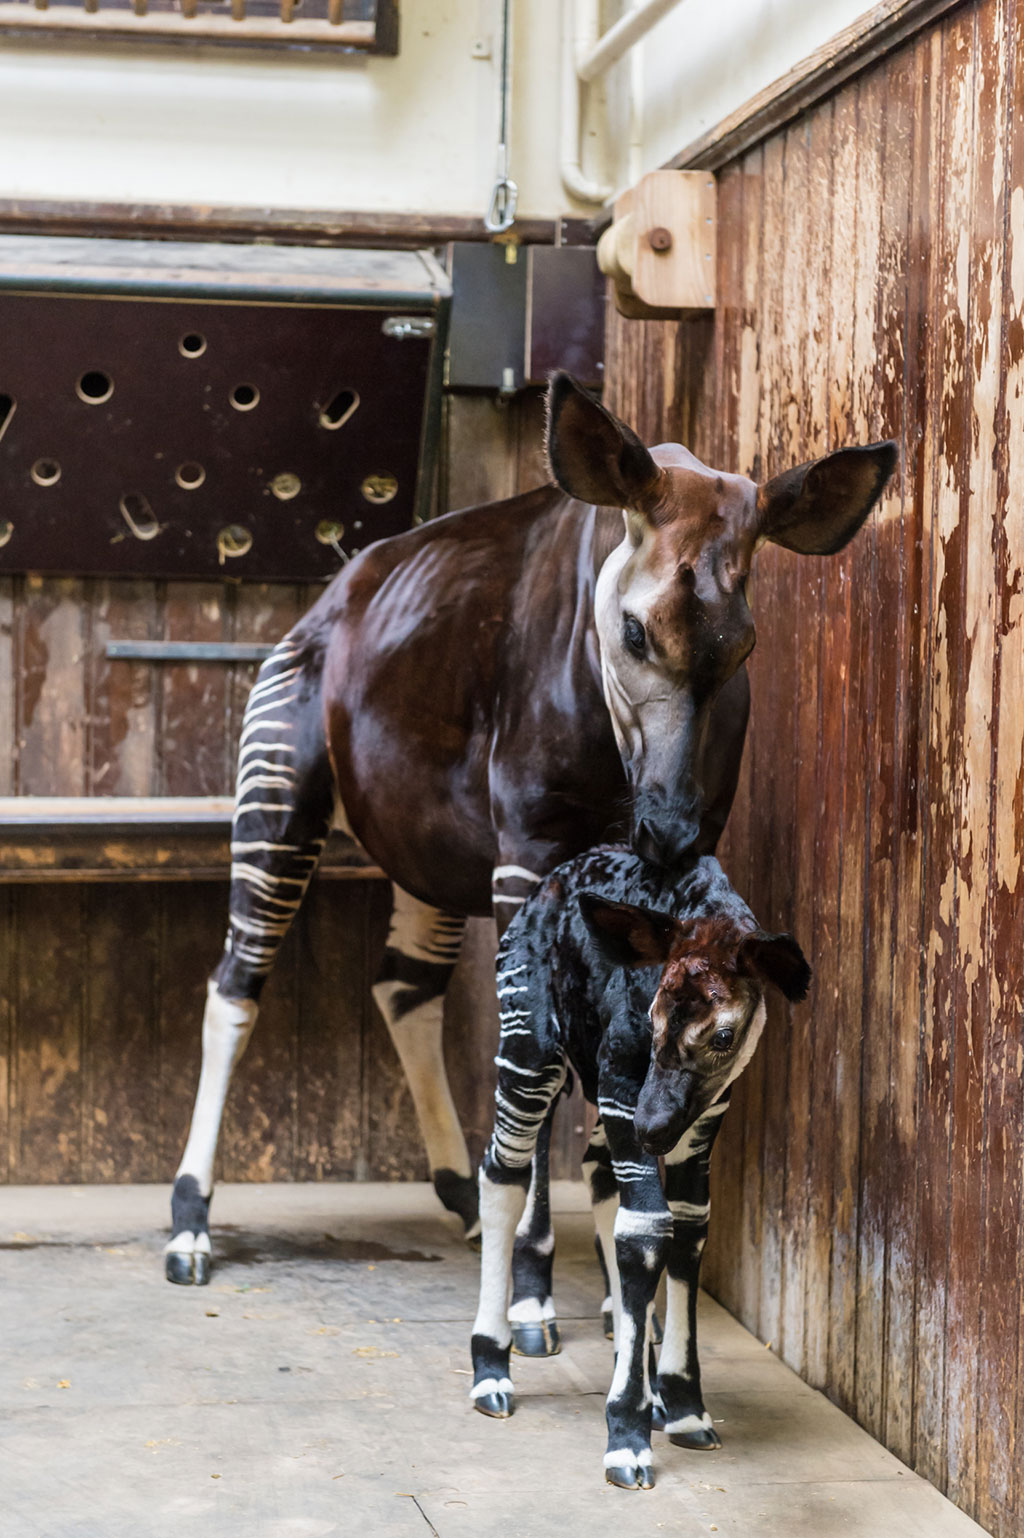 New arrivals for the okapis – first birth in eleven years